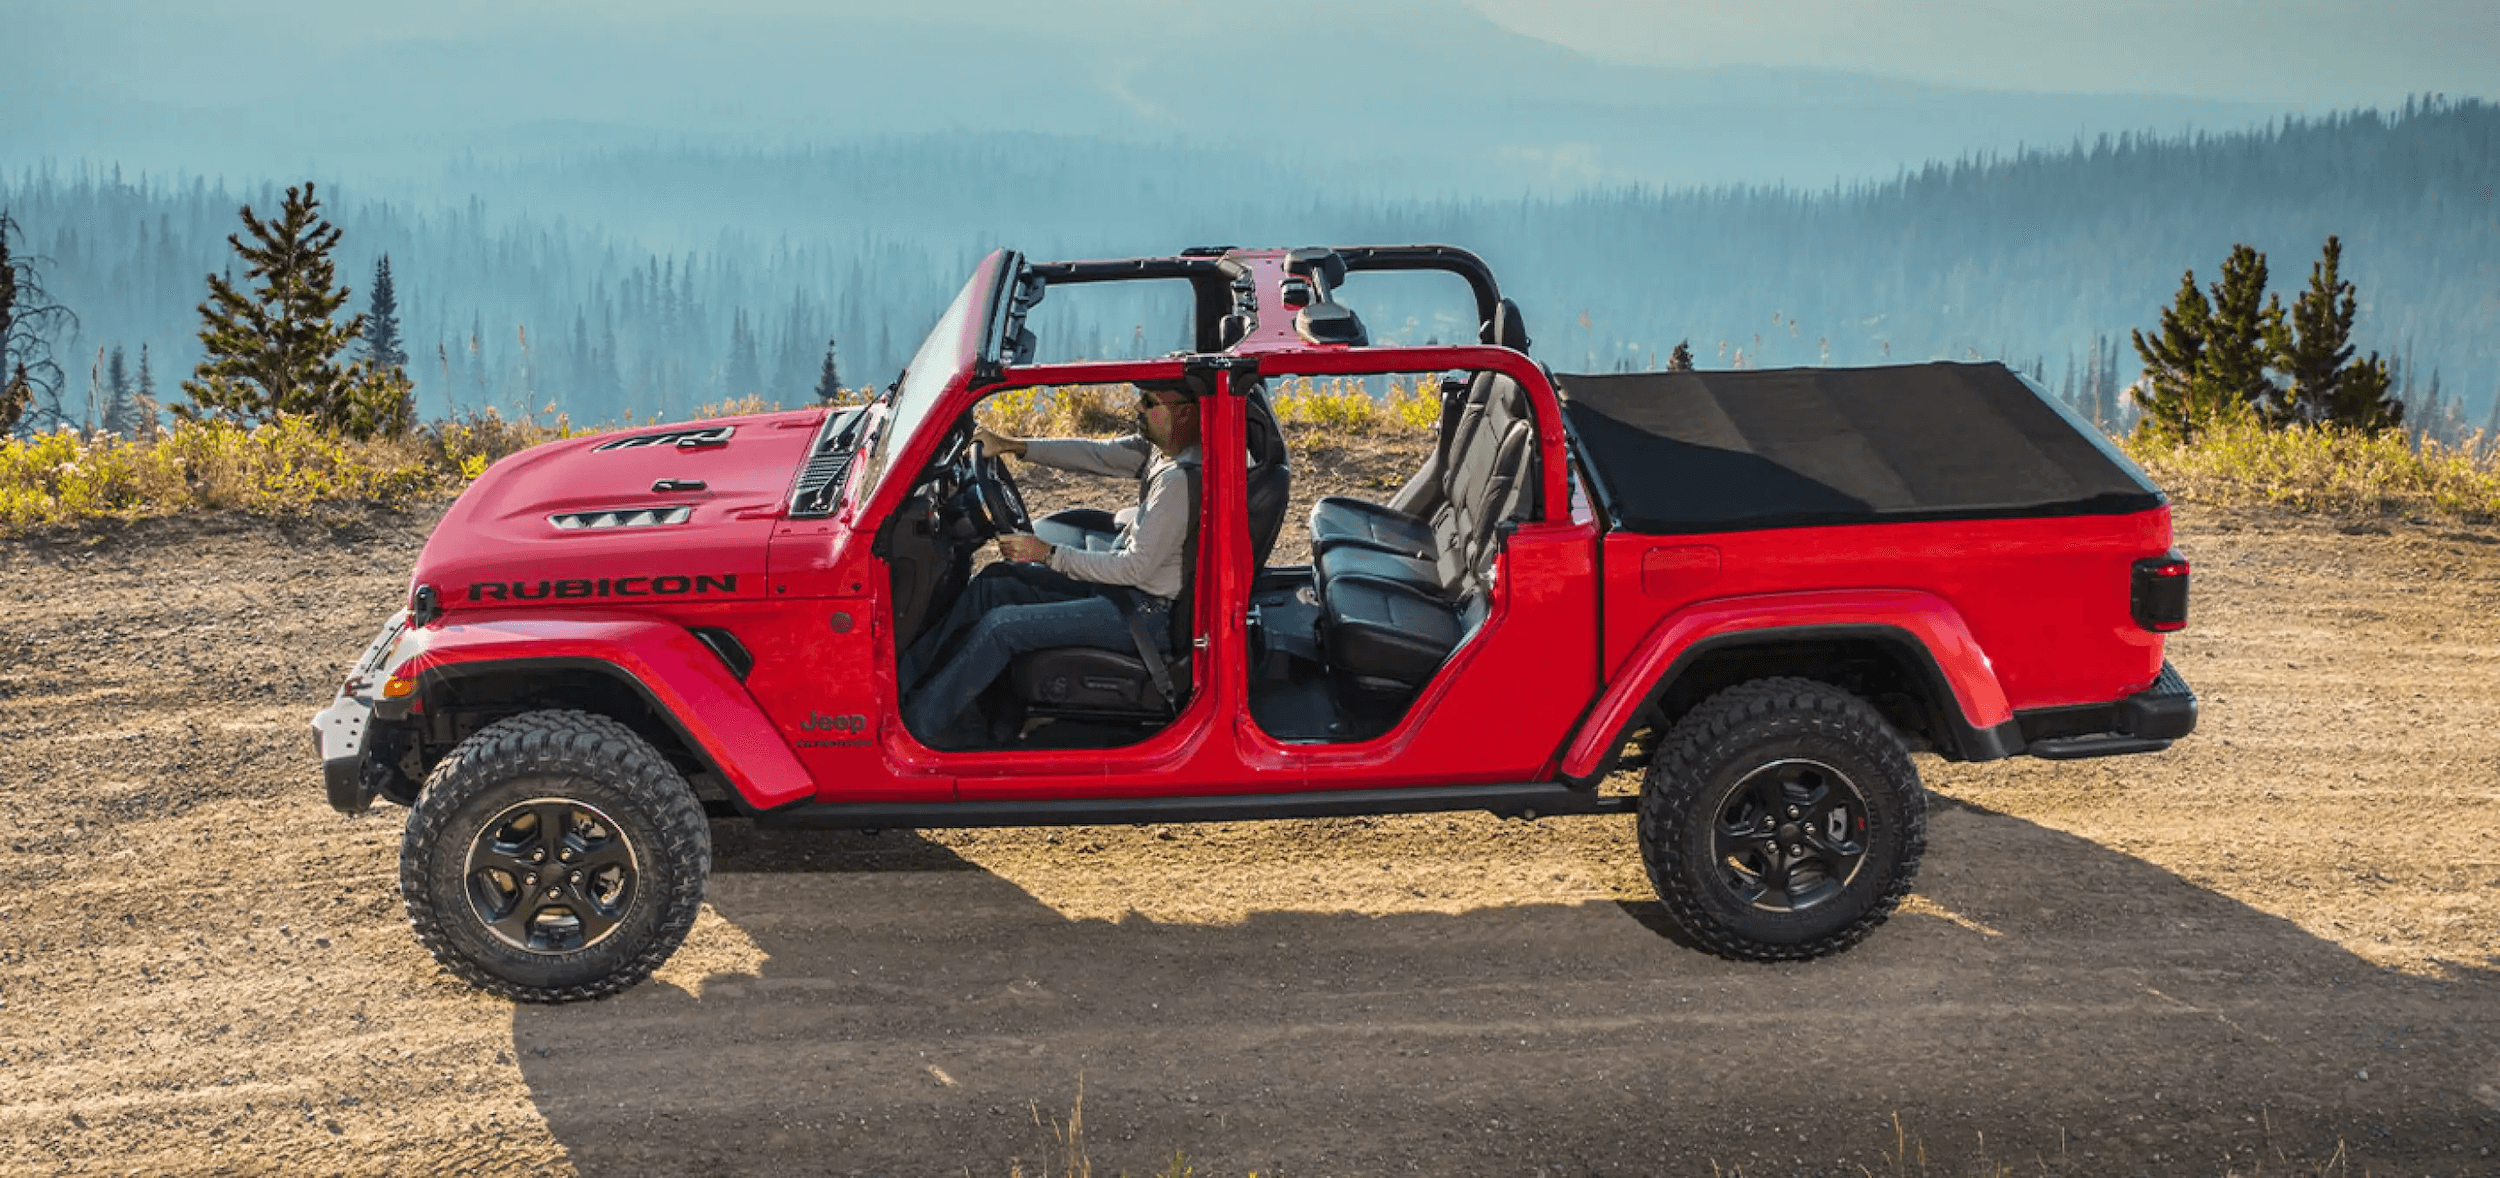 2022 Jeep Gladiator nature shot (no doors and roof)